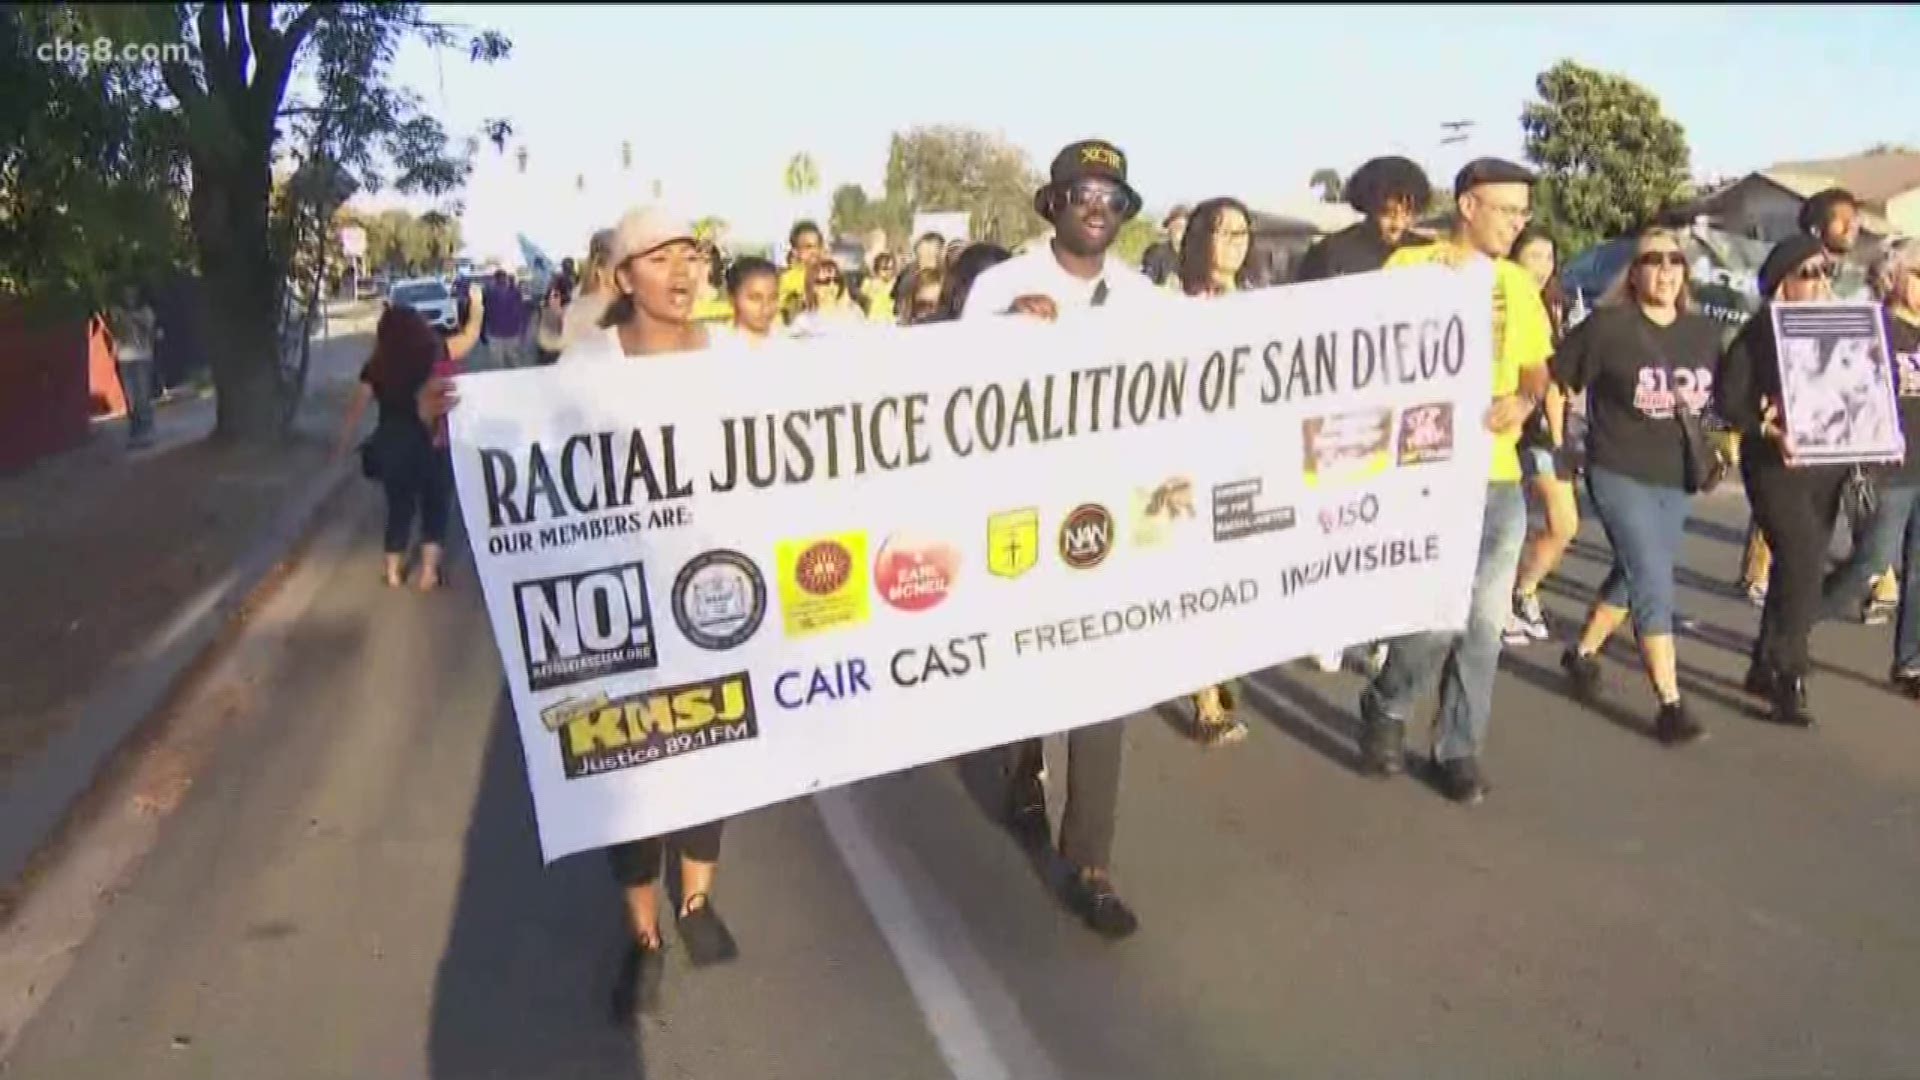 The event organized by the Racial Justice Coalition of San Diego was held “in honor of folks that have lost their lives to police brutality,” according to organizers